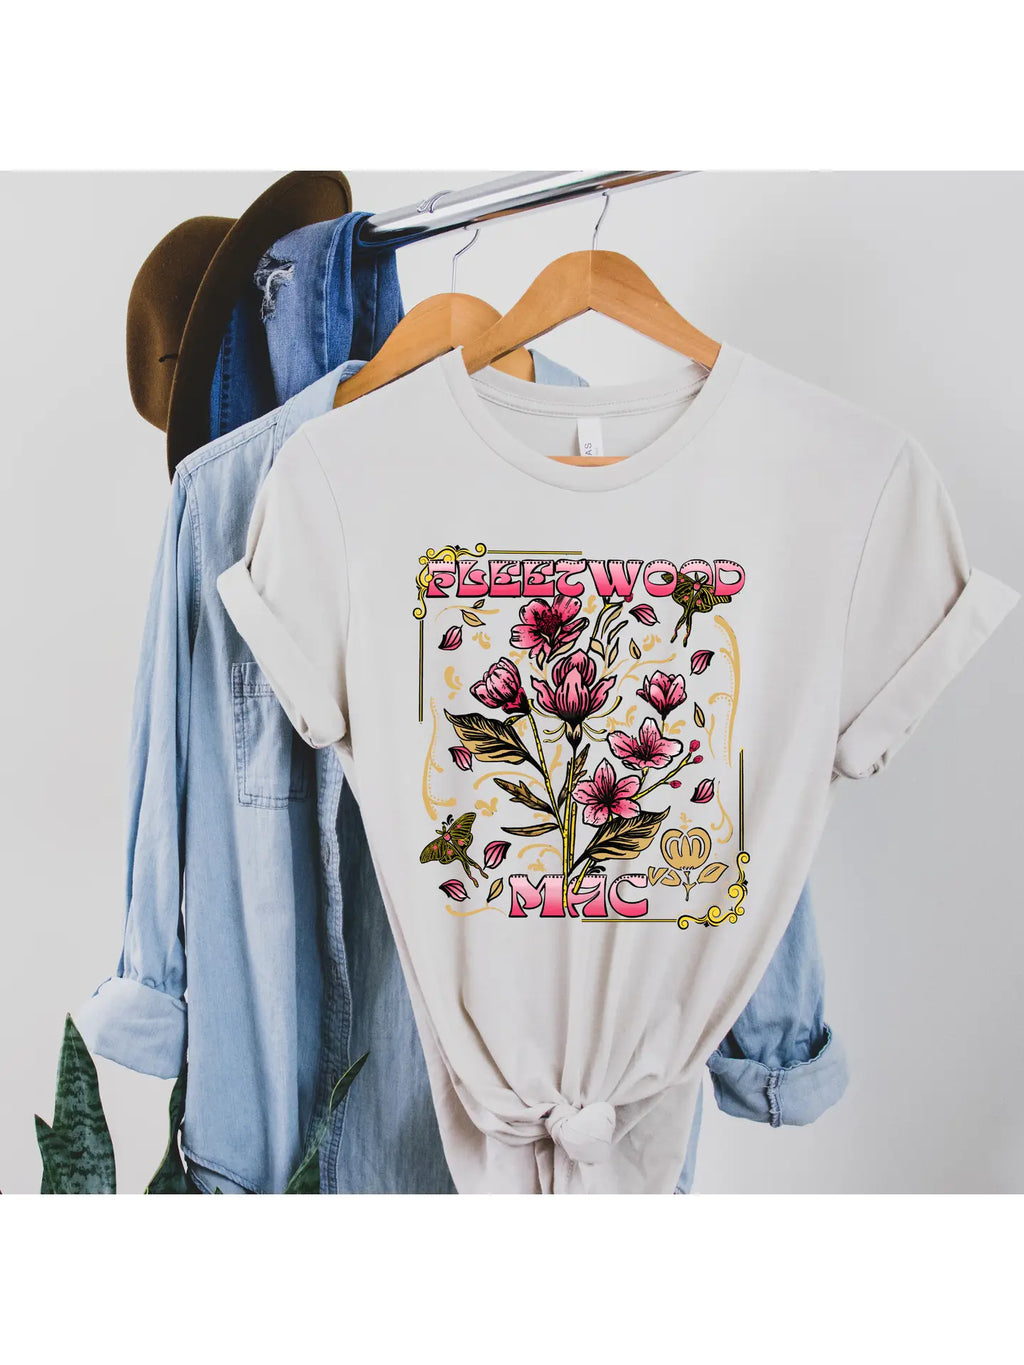 Fleetwood Mac Graphic Tee in Sizes Small-3X